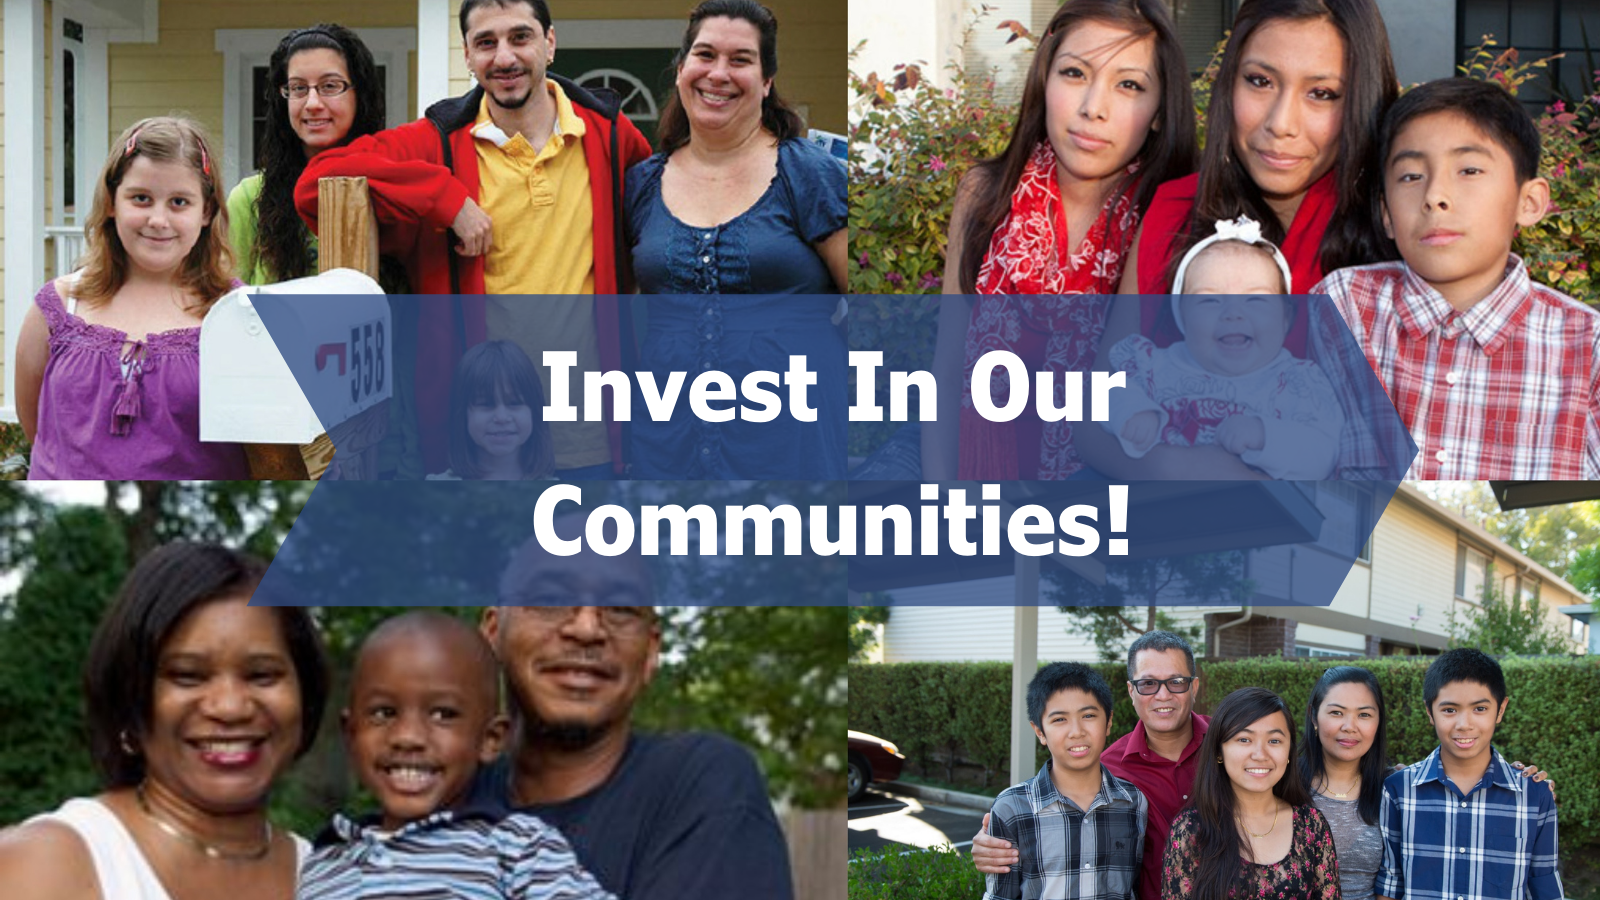 Collage of four images with text saying "invest in our communities"